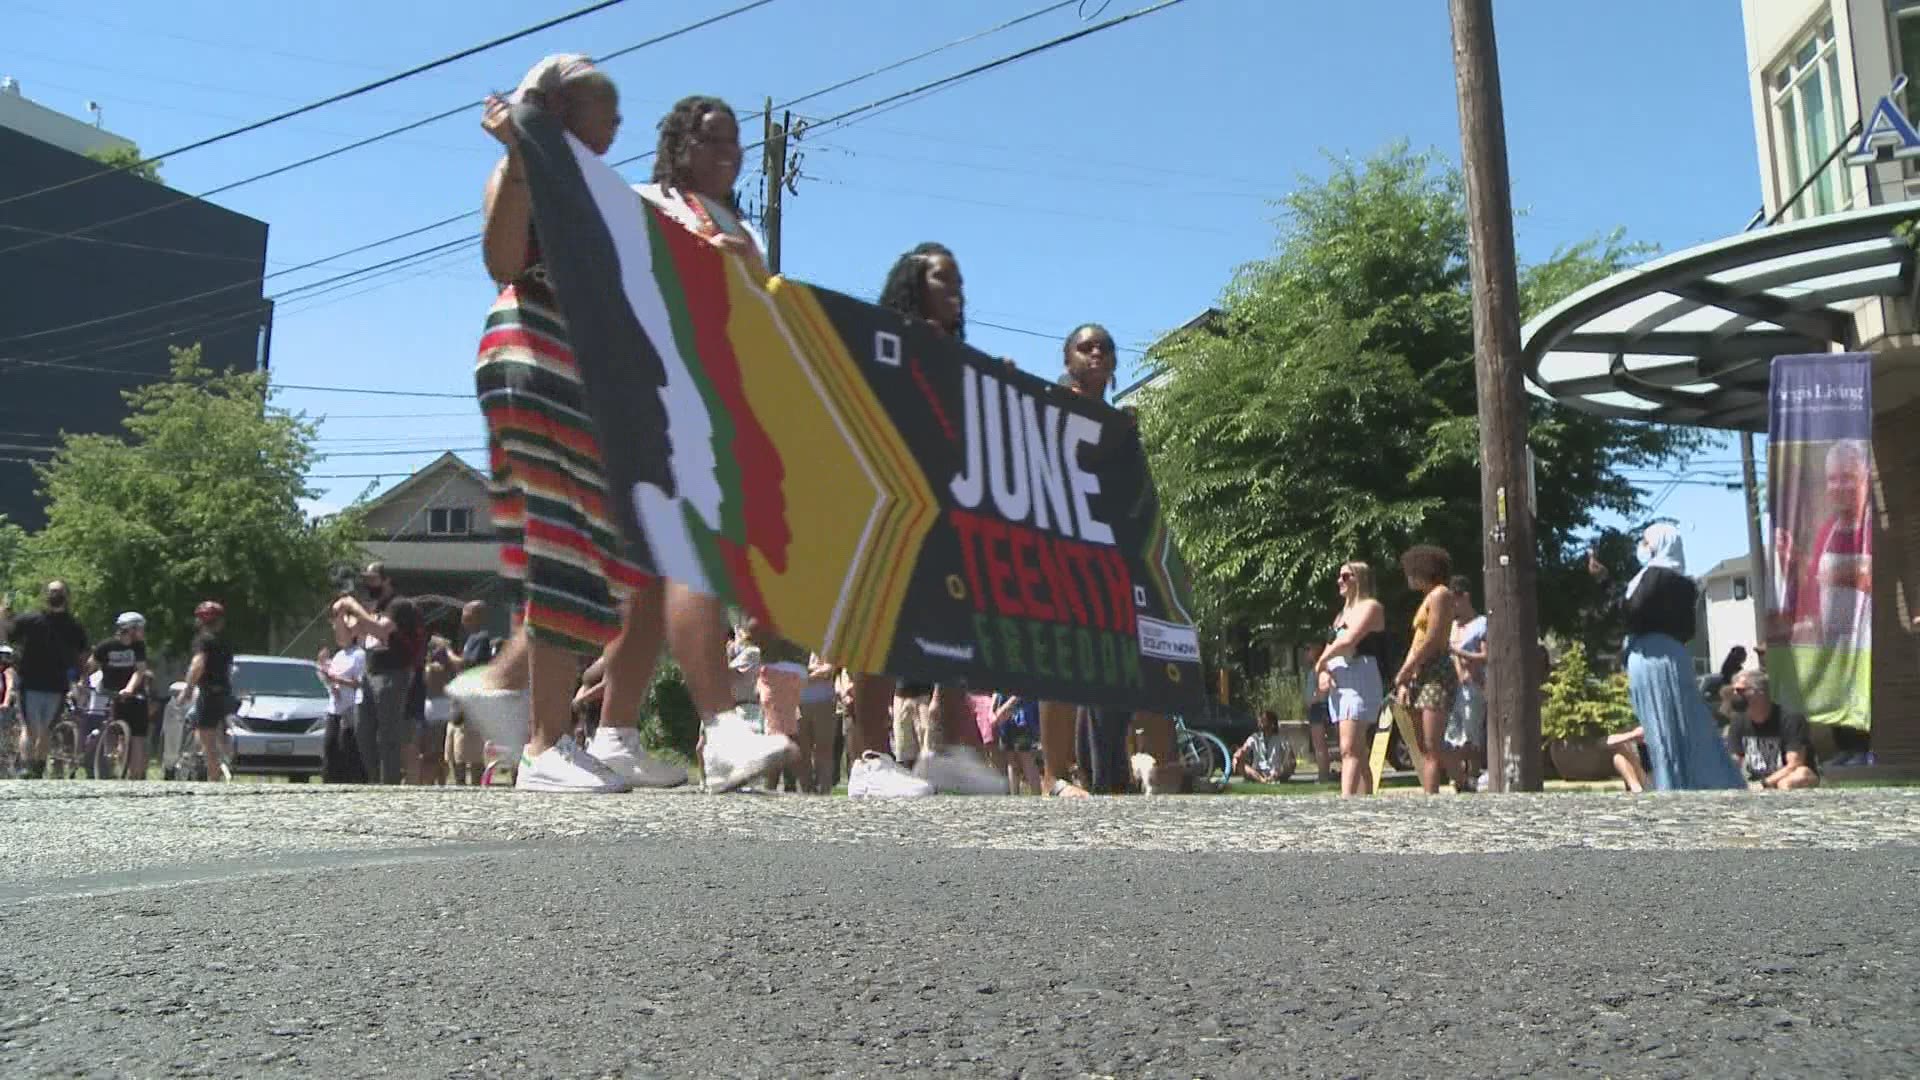 “We really want to showcase what Black brilliance looks like,” organizer TraeAnna Holiday said. "Juneteenth is a marker of that excellence."